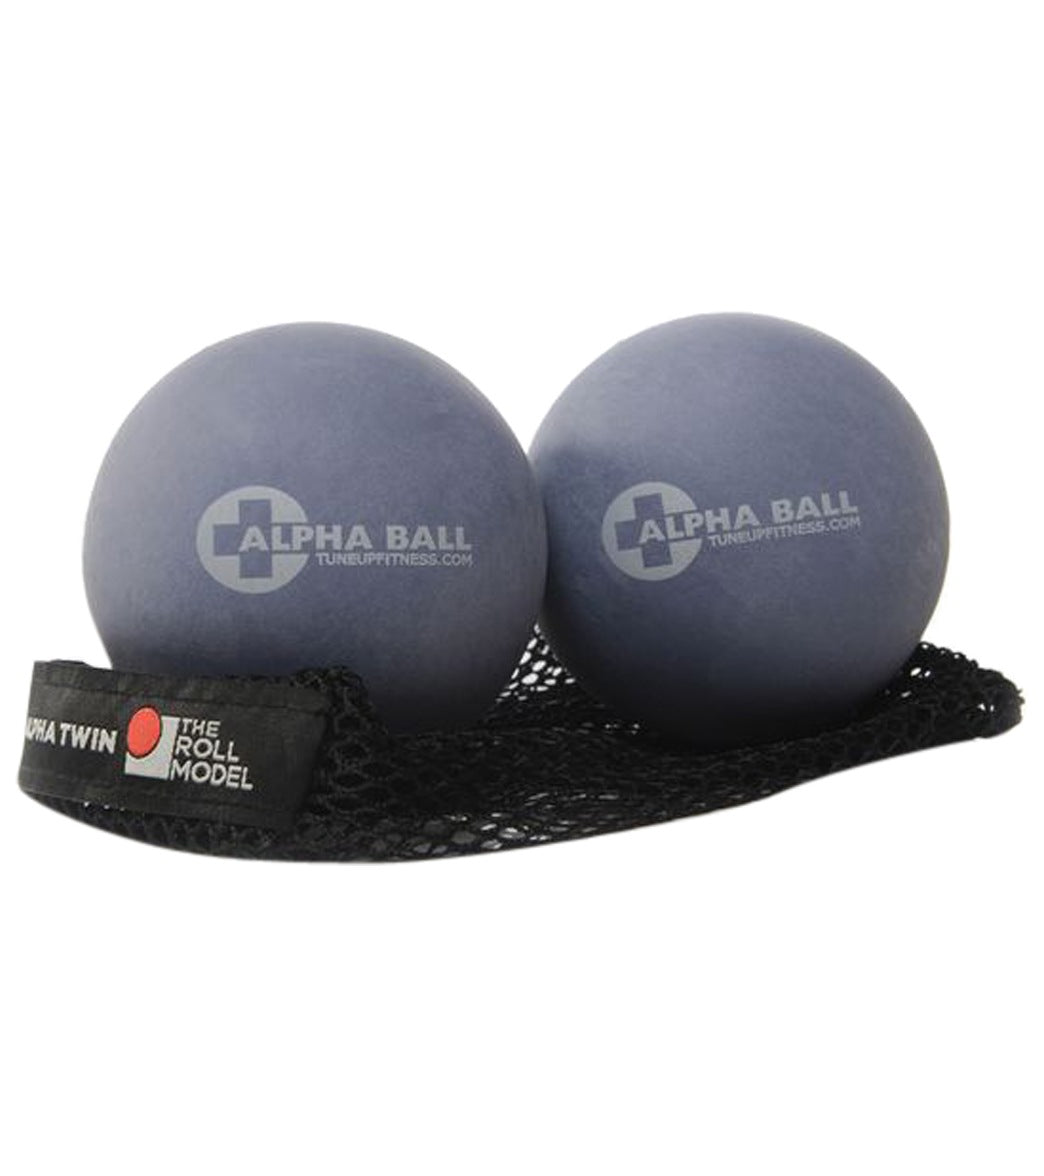 tune up fitness therapy balls